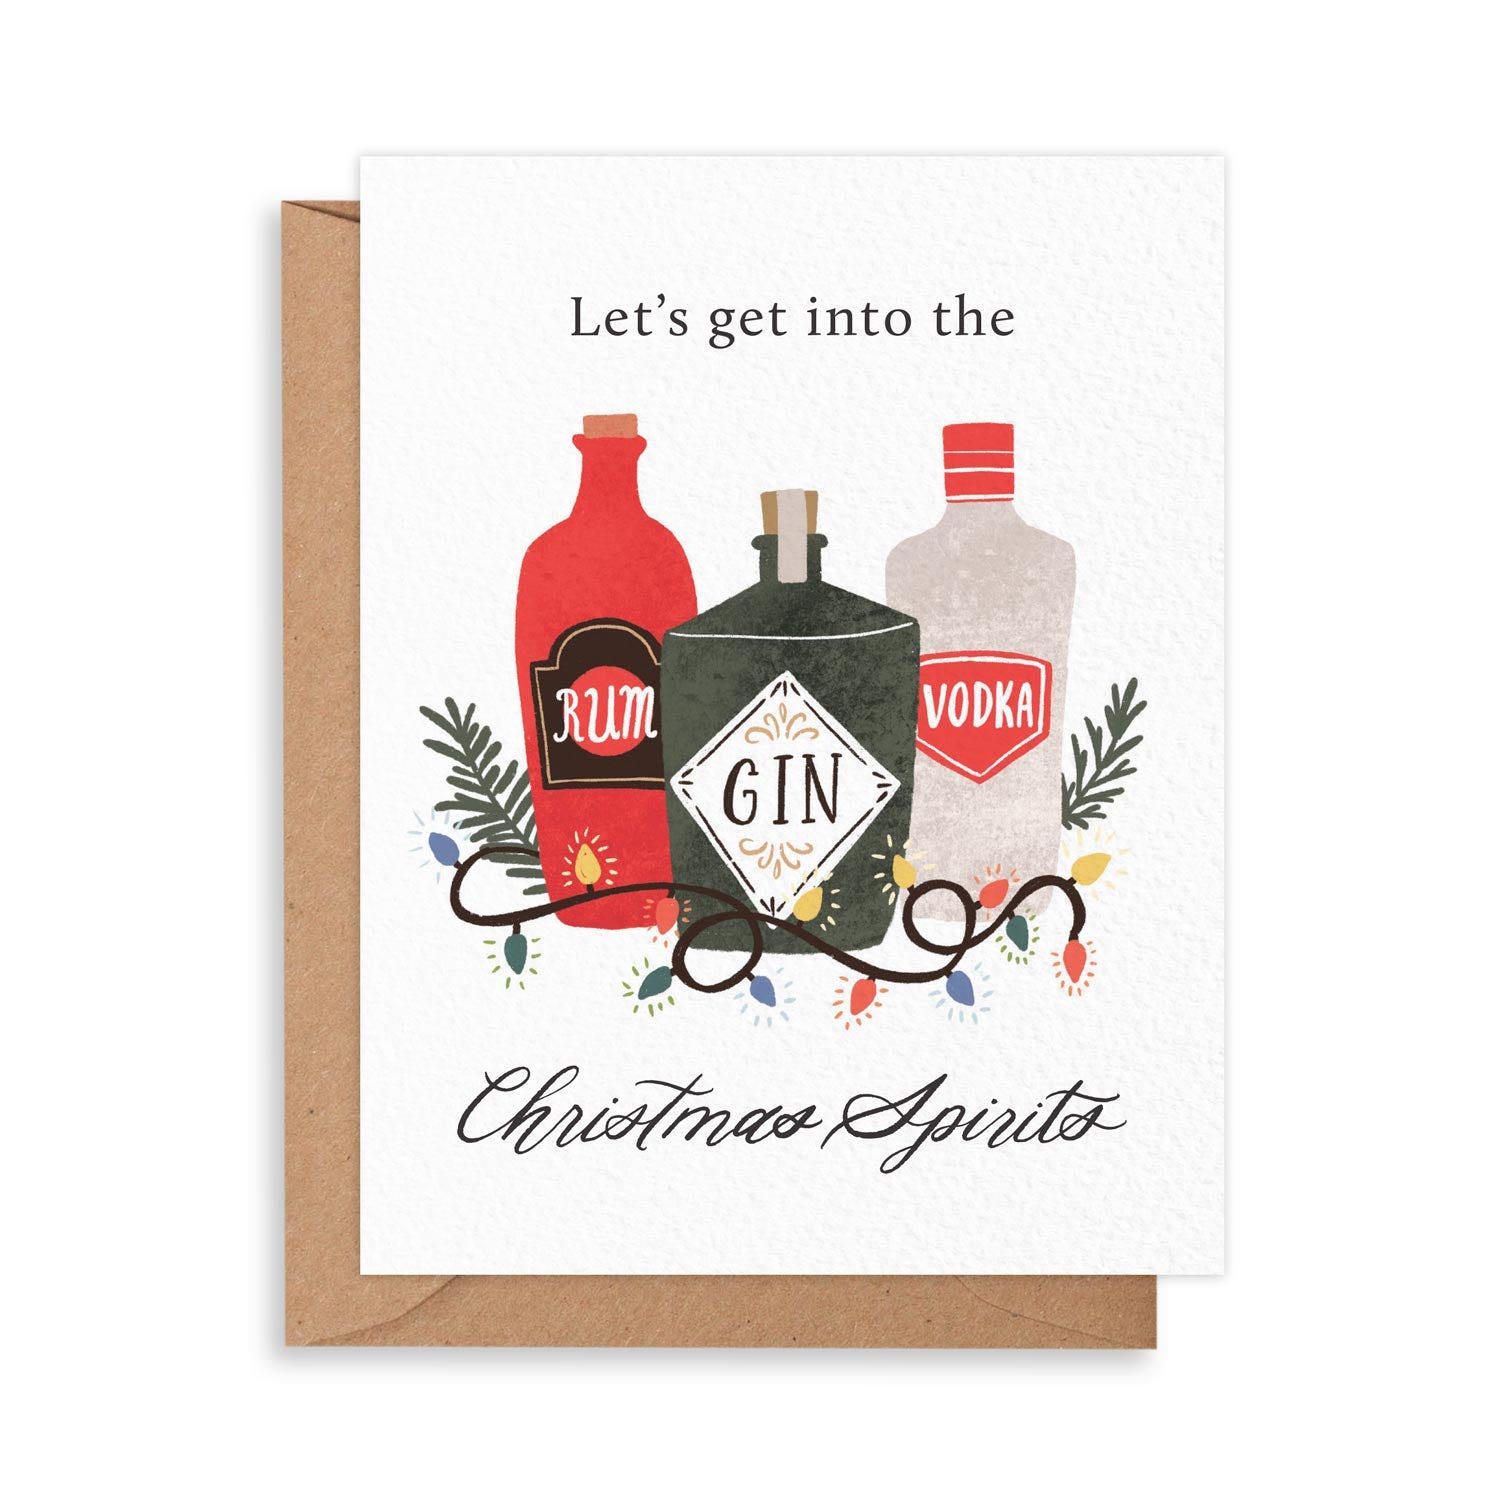 Christmas card of a bottle of rum, gin, vodka with messaging 'Let's get into the Christmas spirits!'